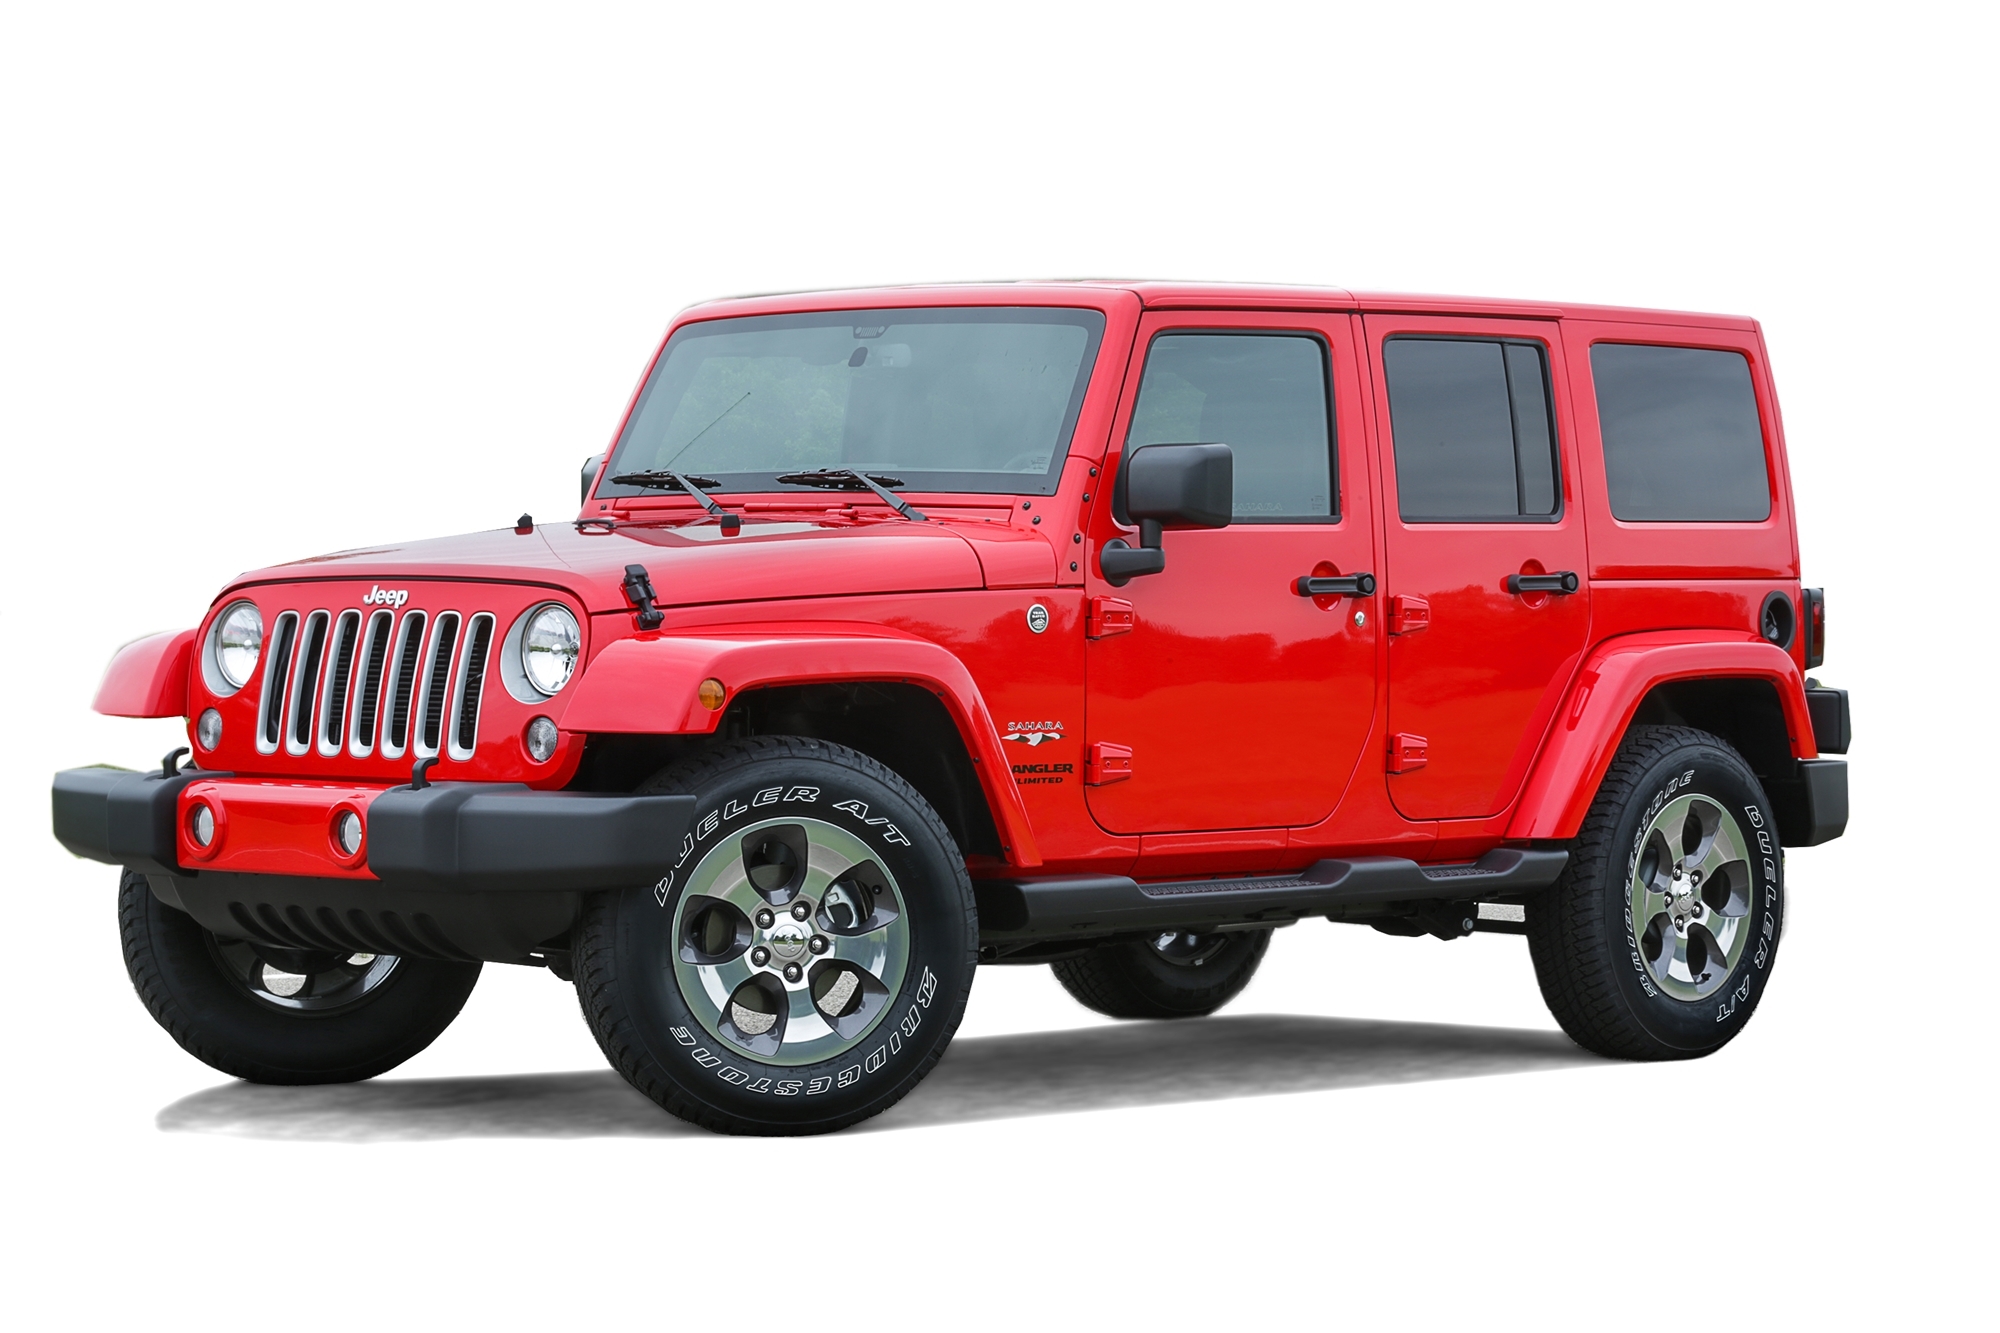 2017 Jeep Wrangler Unlimited Sahara Full Specs, Features and Price | CarBuzz